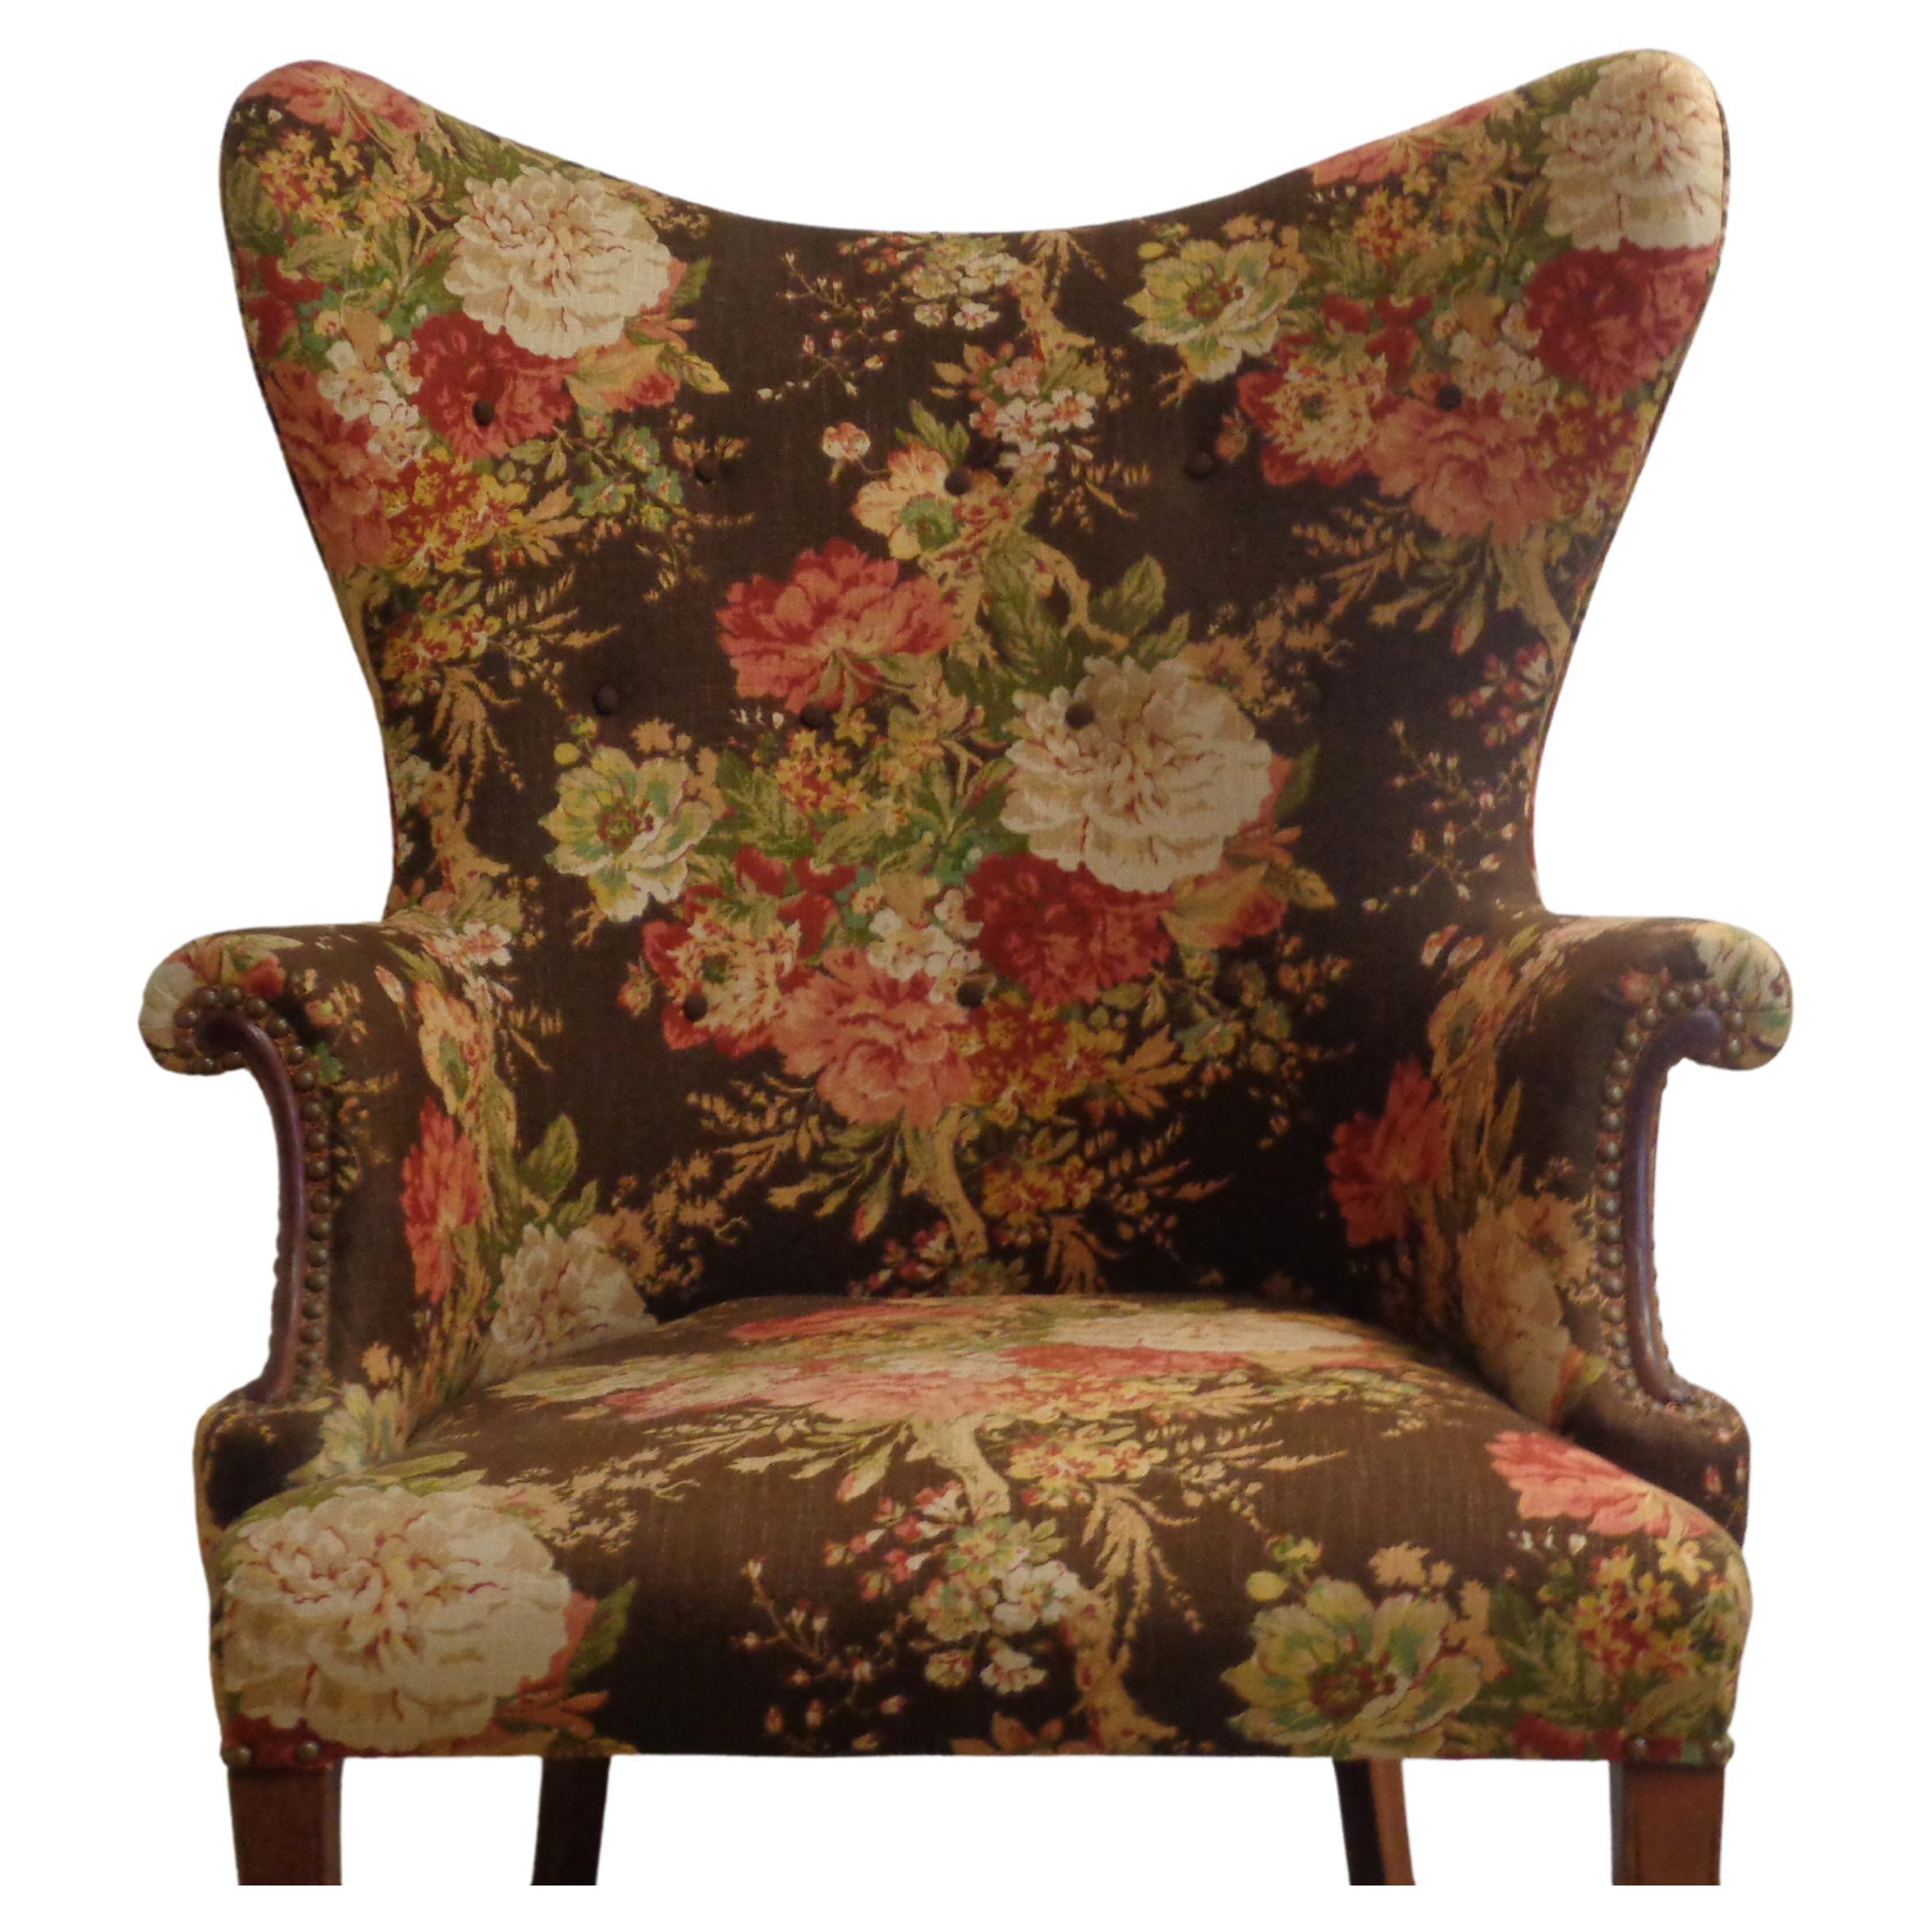  Exaggerated butterfly back wing chair w/ tapered mahogany legs / brass tacking at wood accented rolled arms & top of front legs / original floral design textured cotton linen upholstery w/ button decorated front backrest. Beautiful chair. Circa